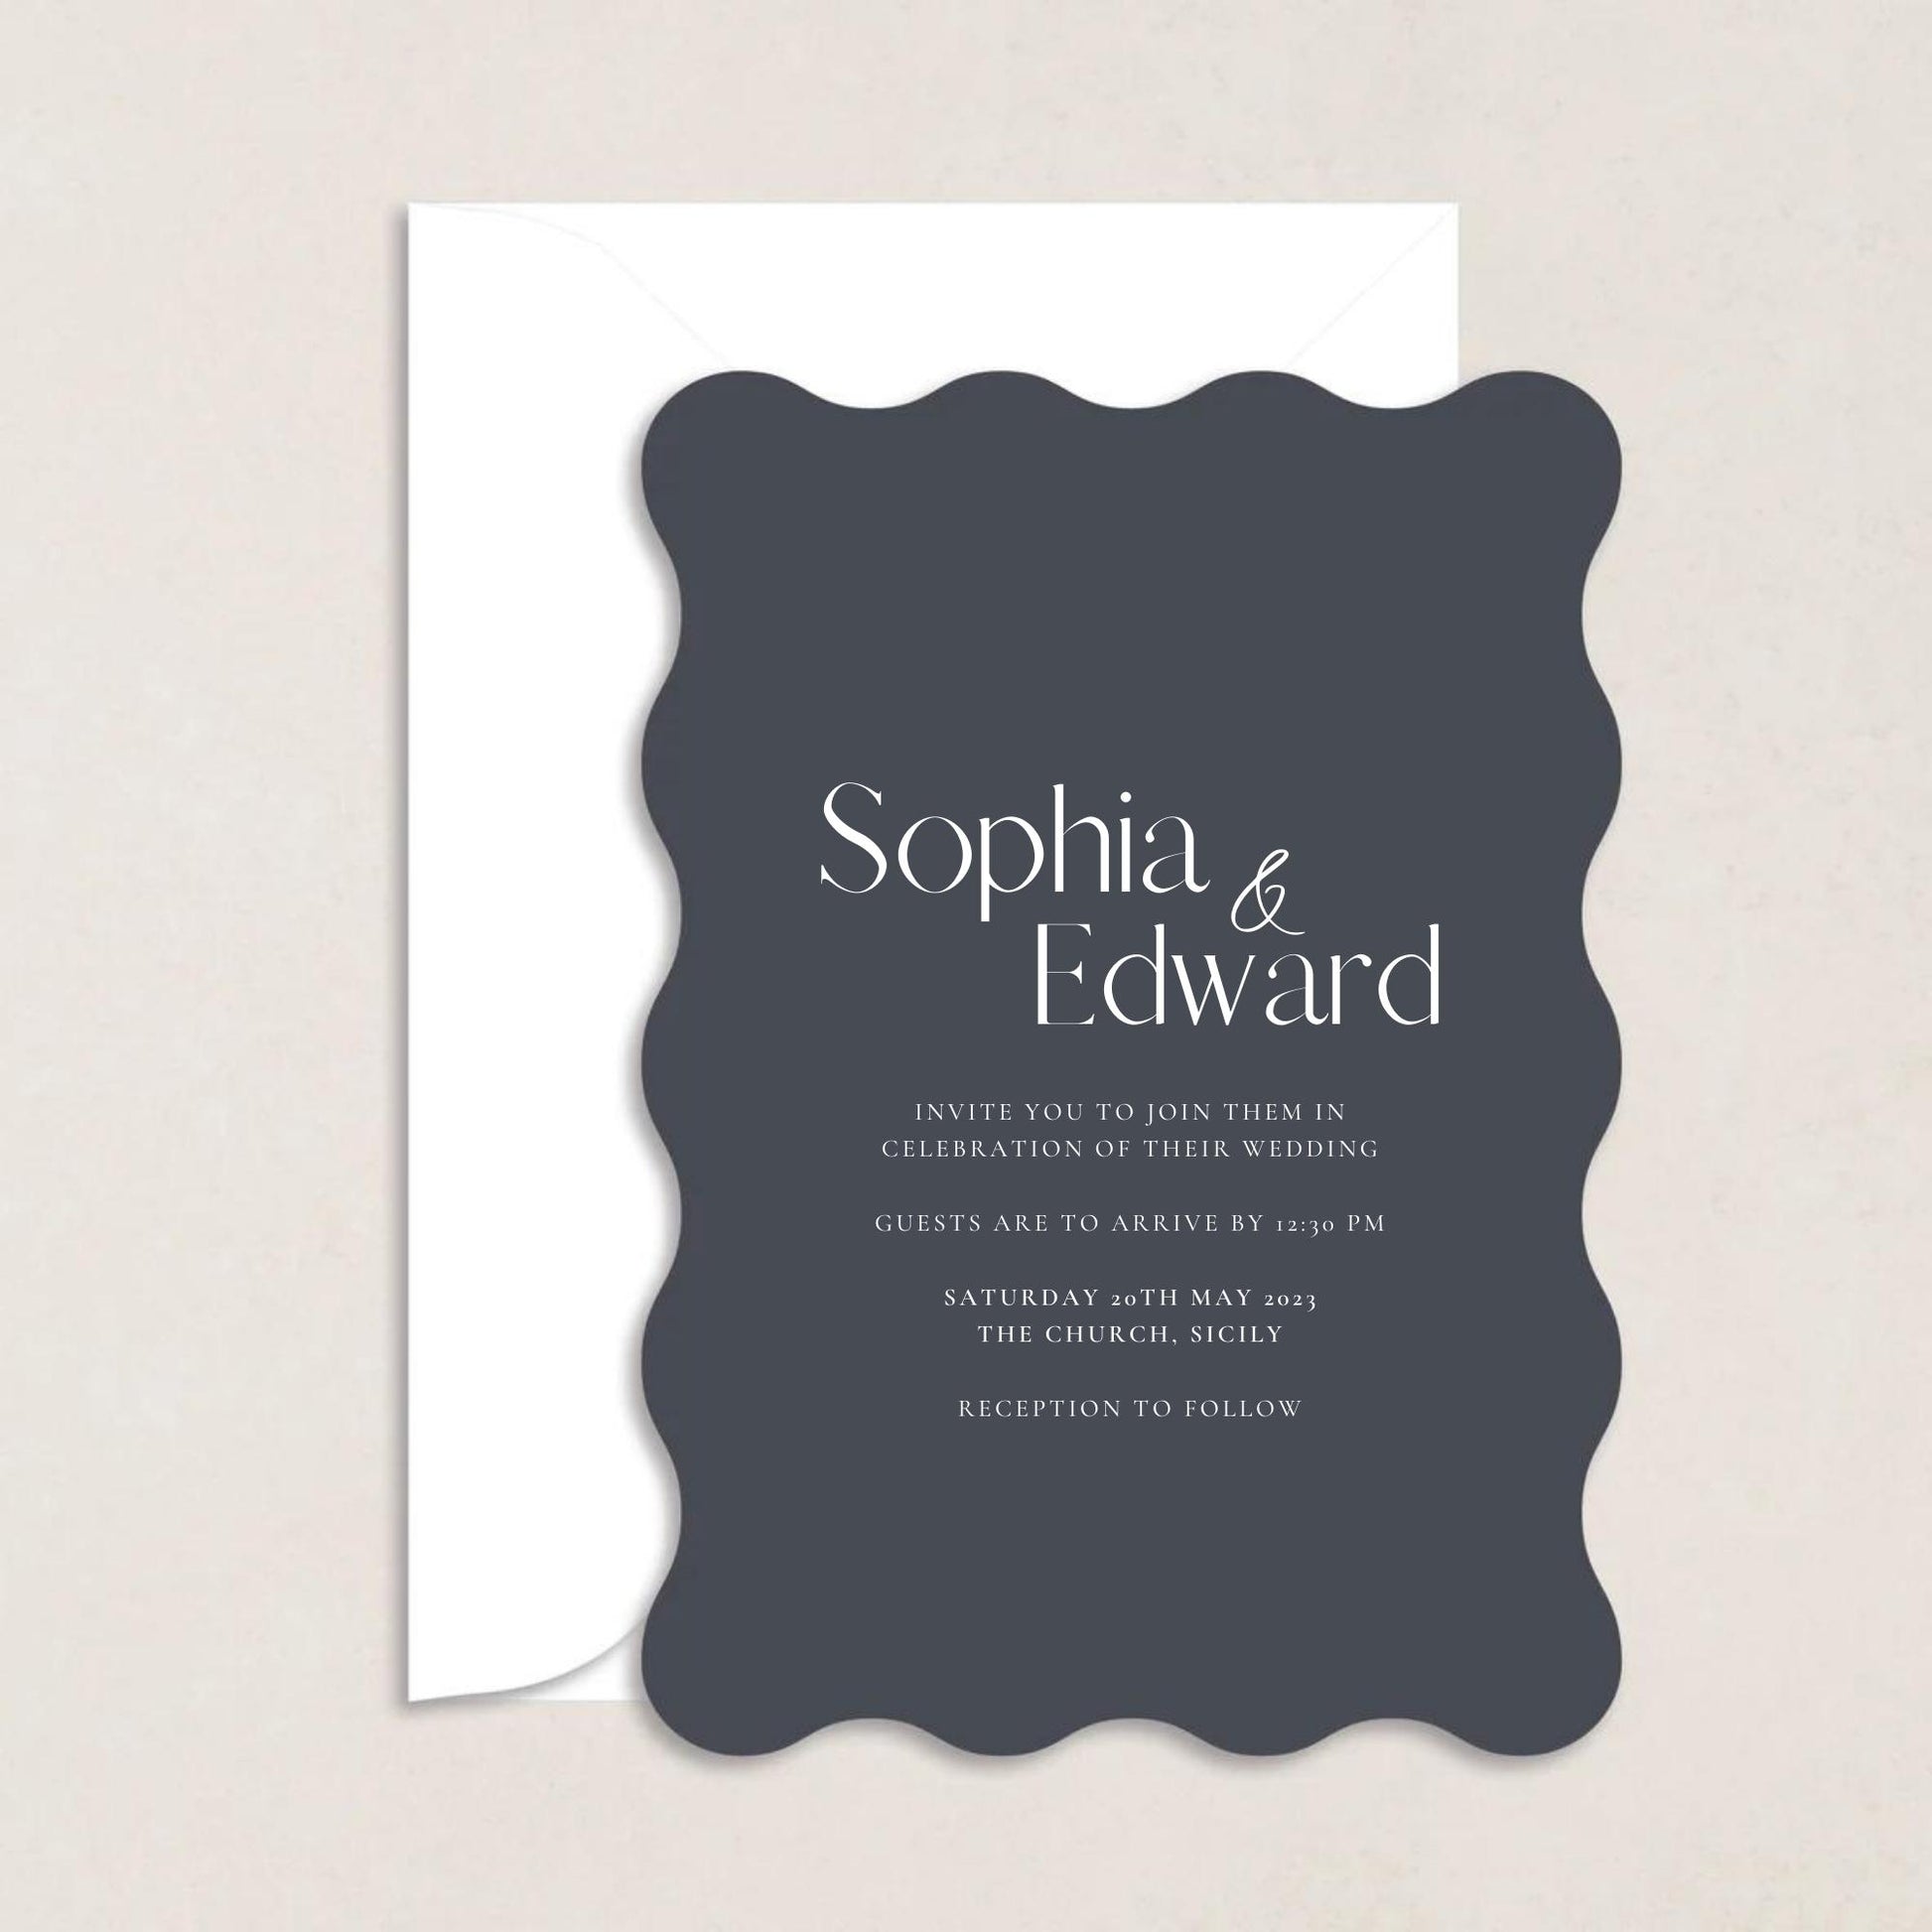 Sophia Wedding Invitations - Wedding Invitations available at The Ivy Collection | Luxury Wedding Stationery